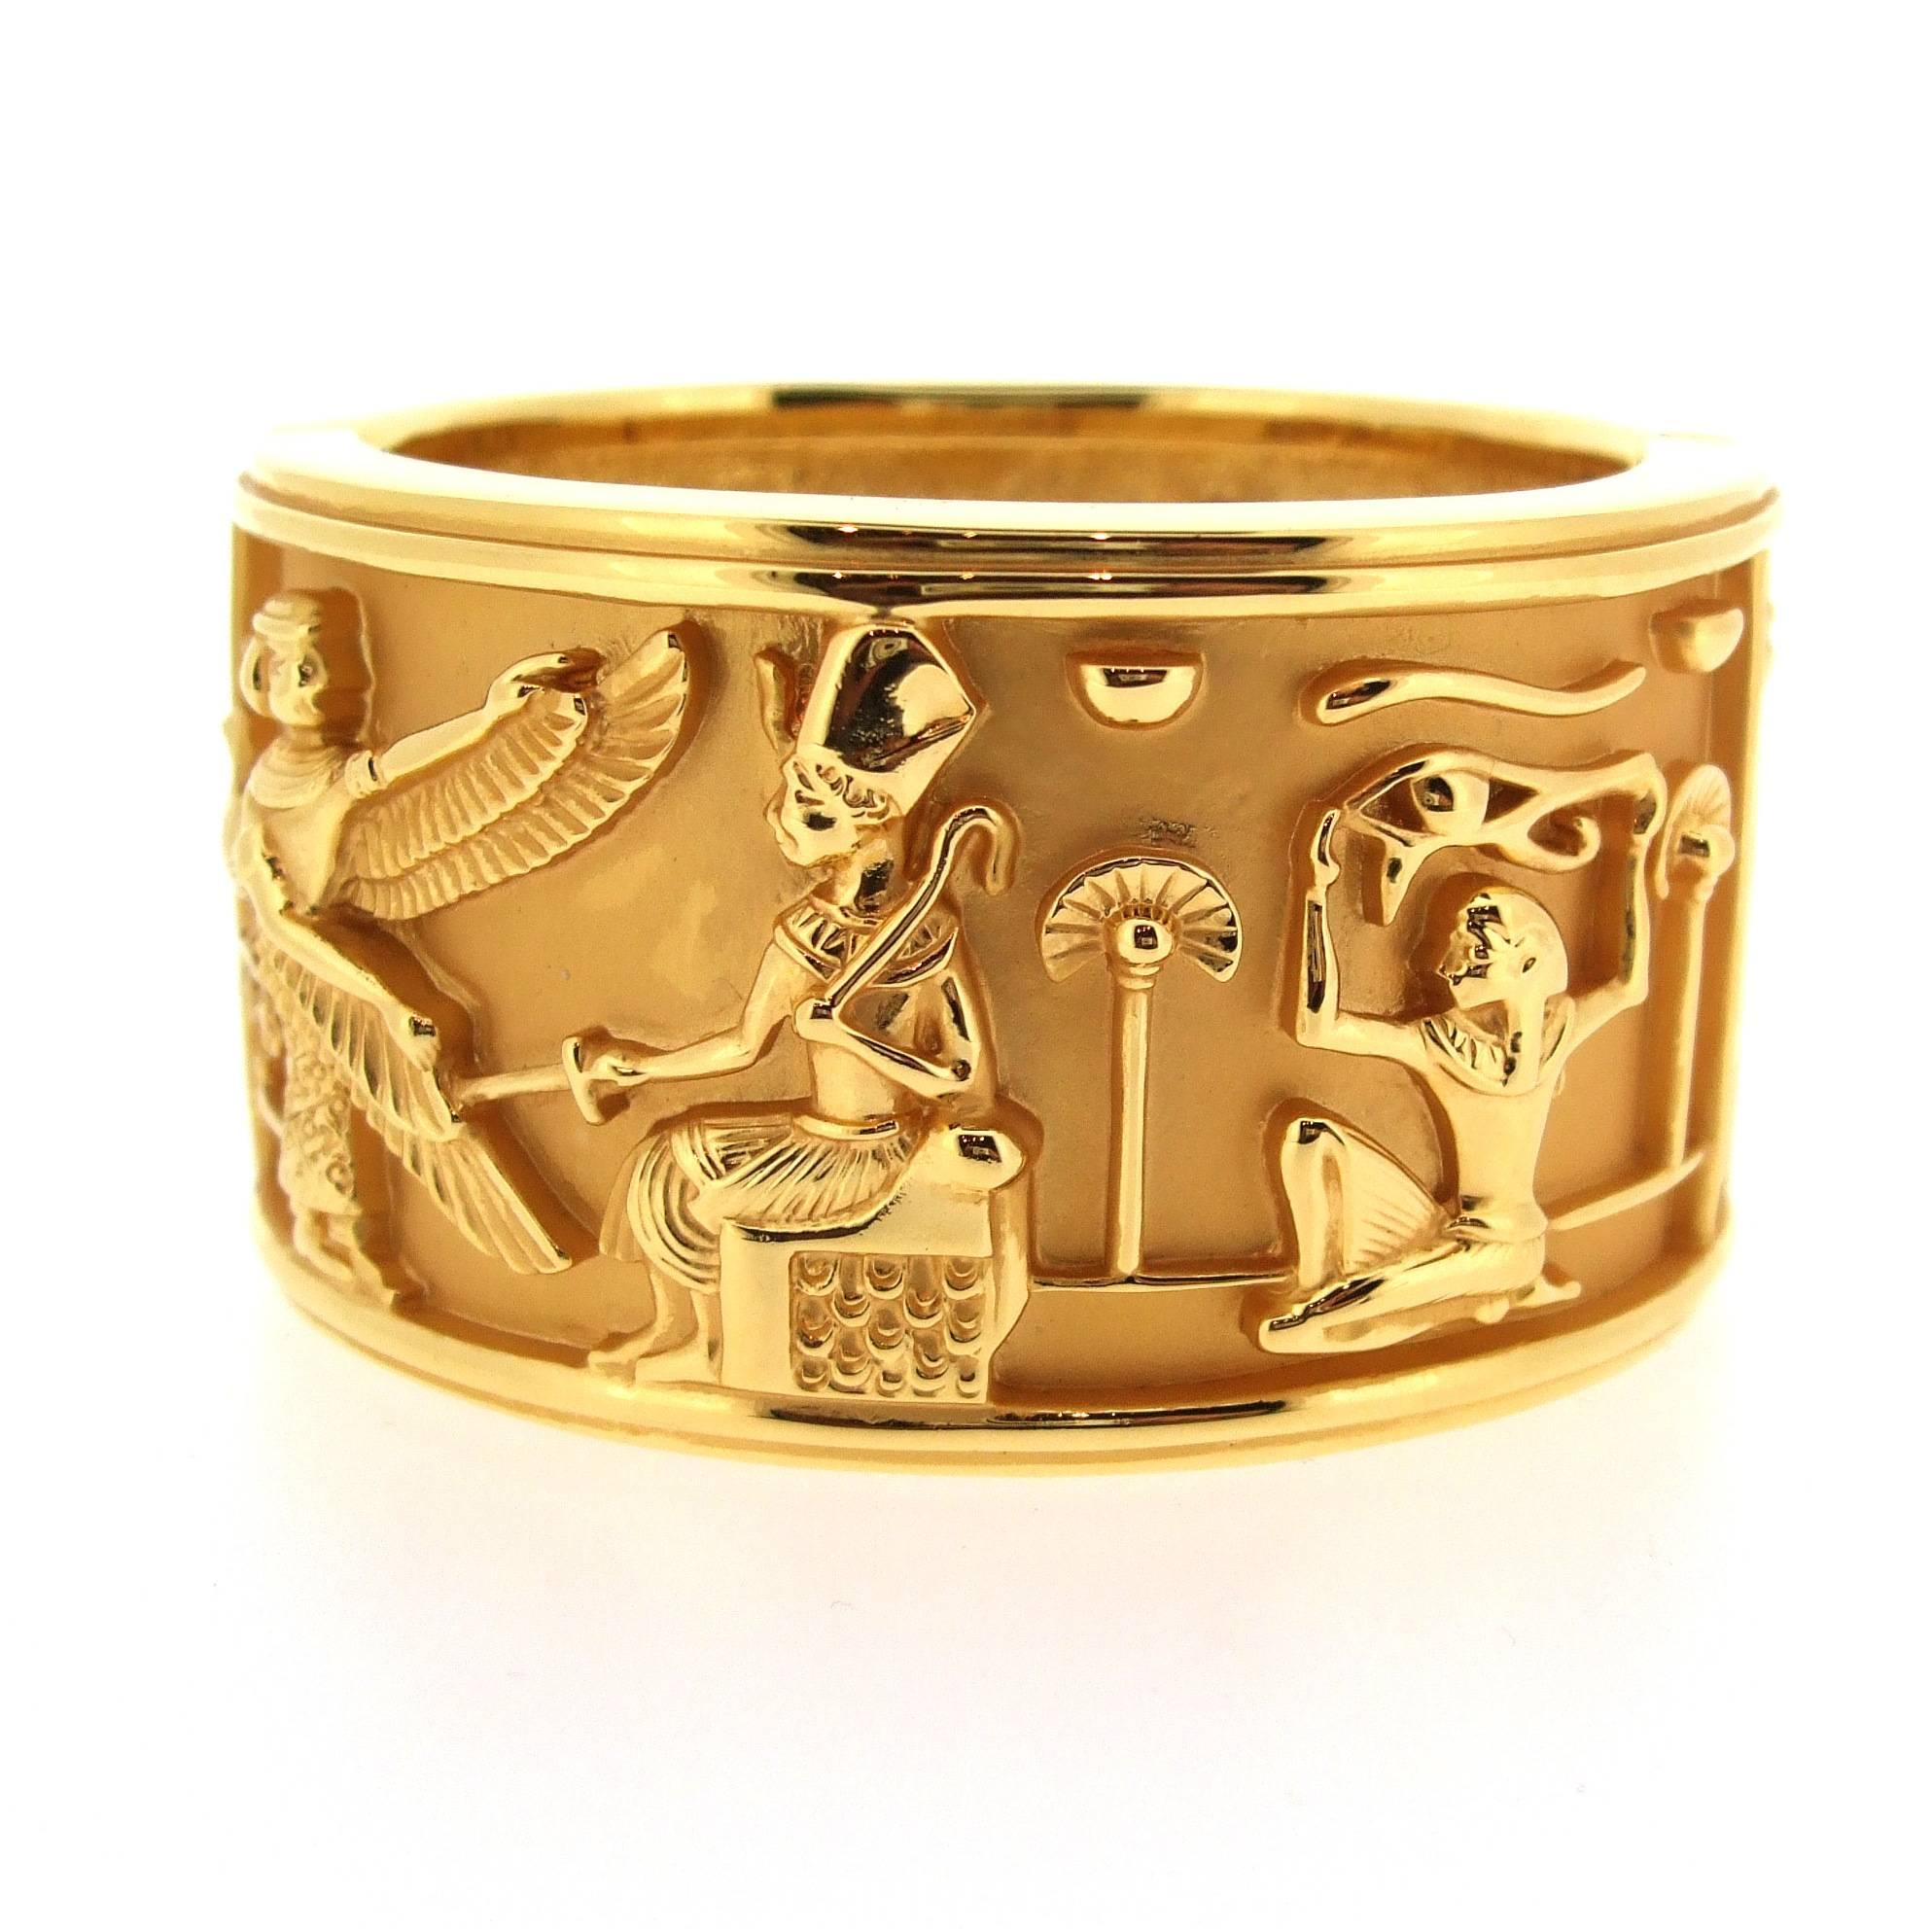 A piece of the 1994 Elizabeth Taylor for Avon collection featuring Egyptian characters in daily life, in a montage in various different poses all the way around.  A gold plated clamper bracelet that opens up to fit around the wrist. 

Elizabeth